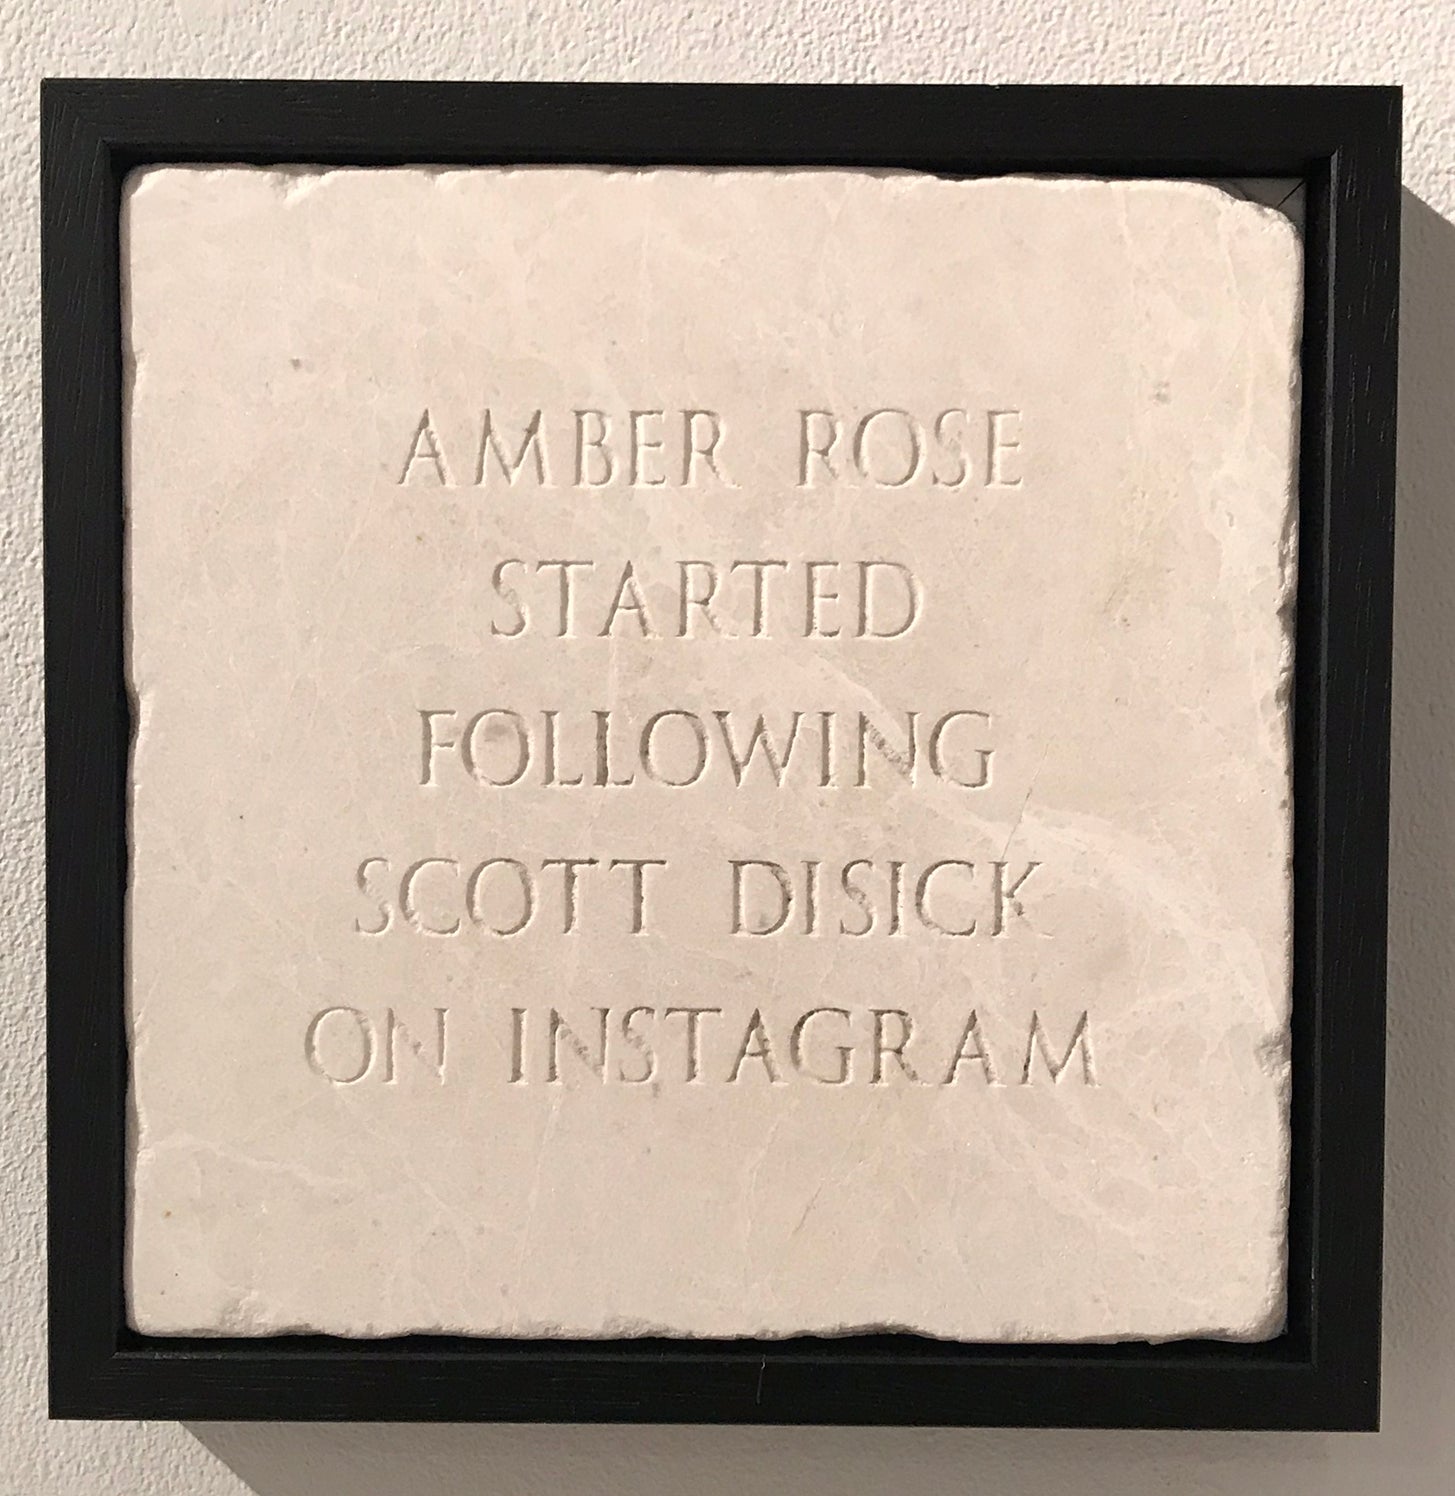 Sarah Maple "Amber Rose Started Following Scott Disick On Instagram"